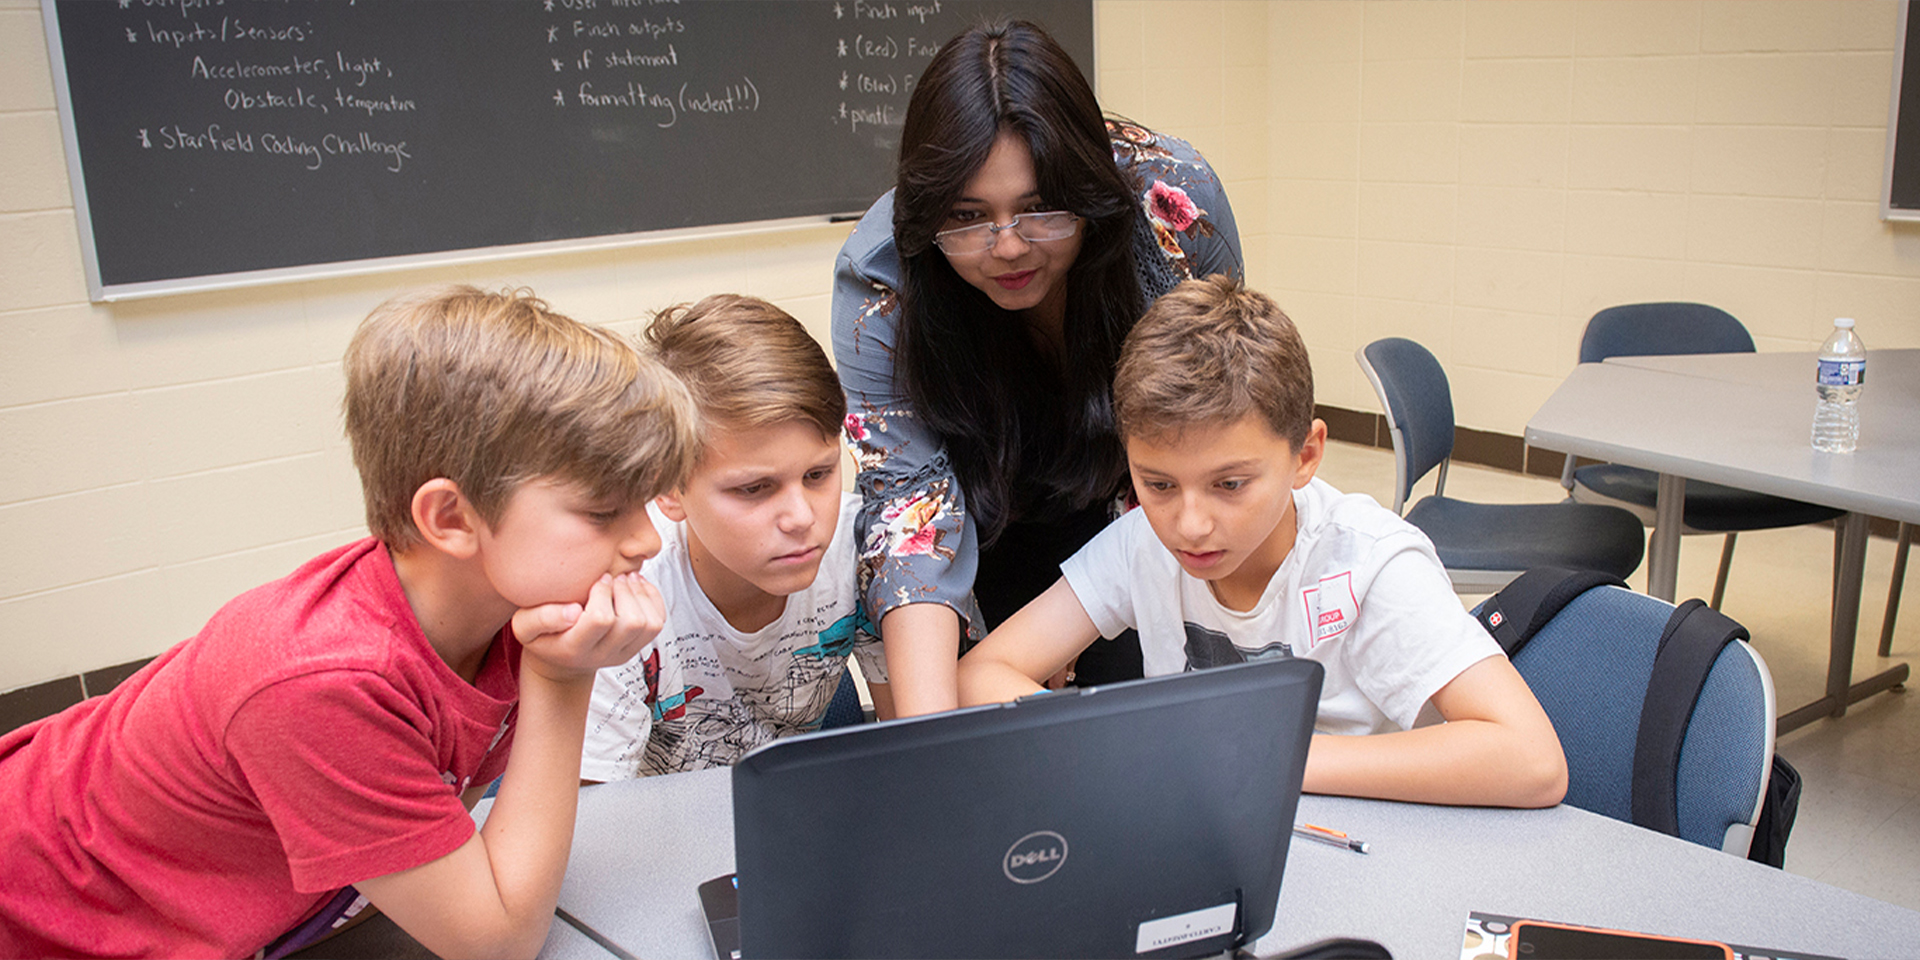 Teacher points to laptop screen as she helps three students with an assignment